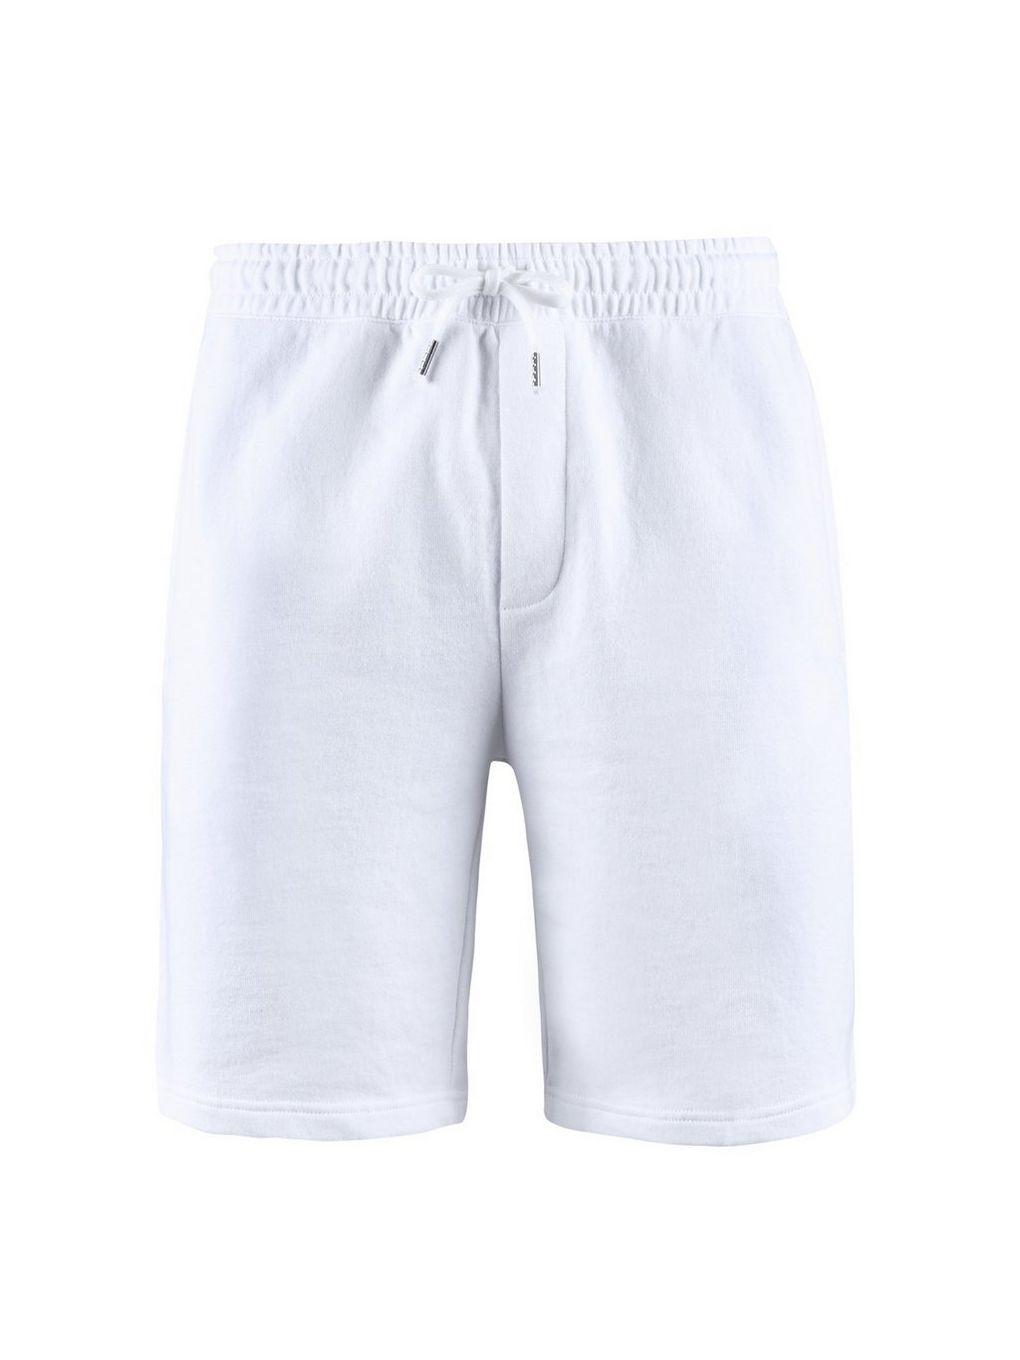 white jersey shorts mens